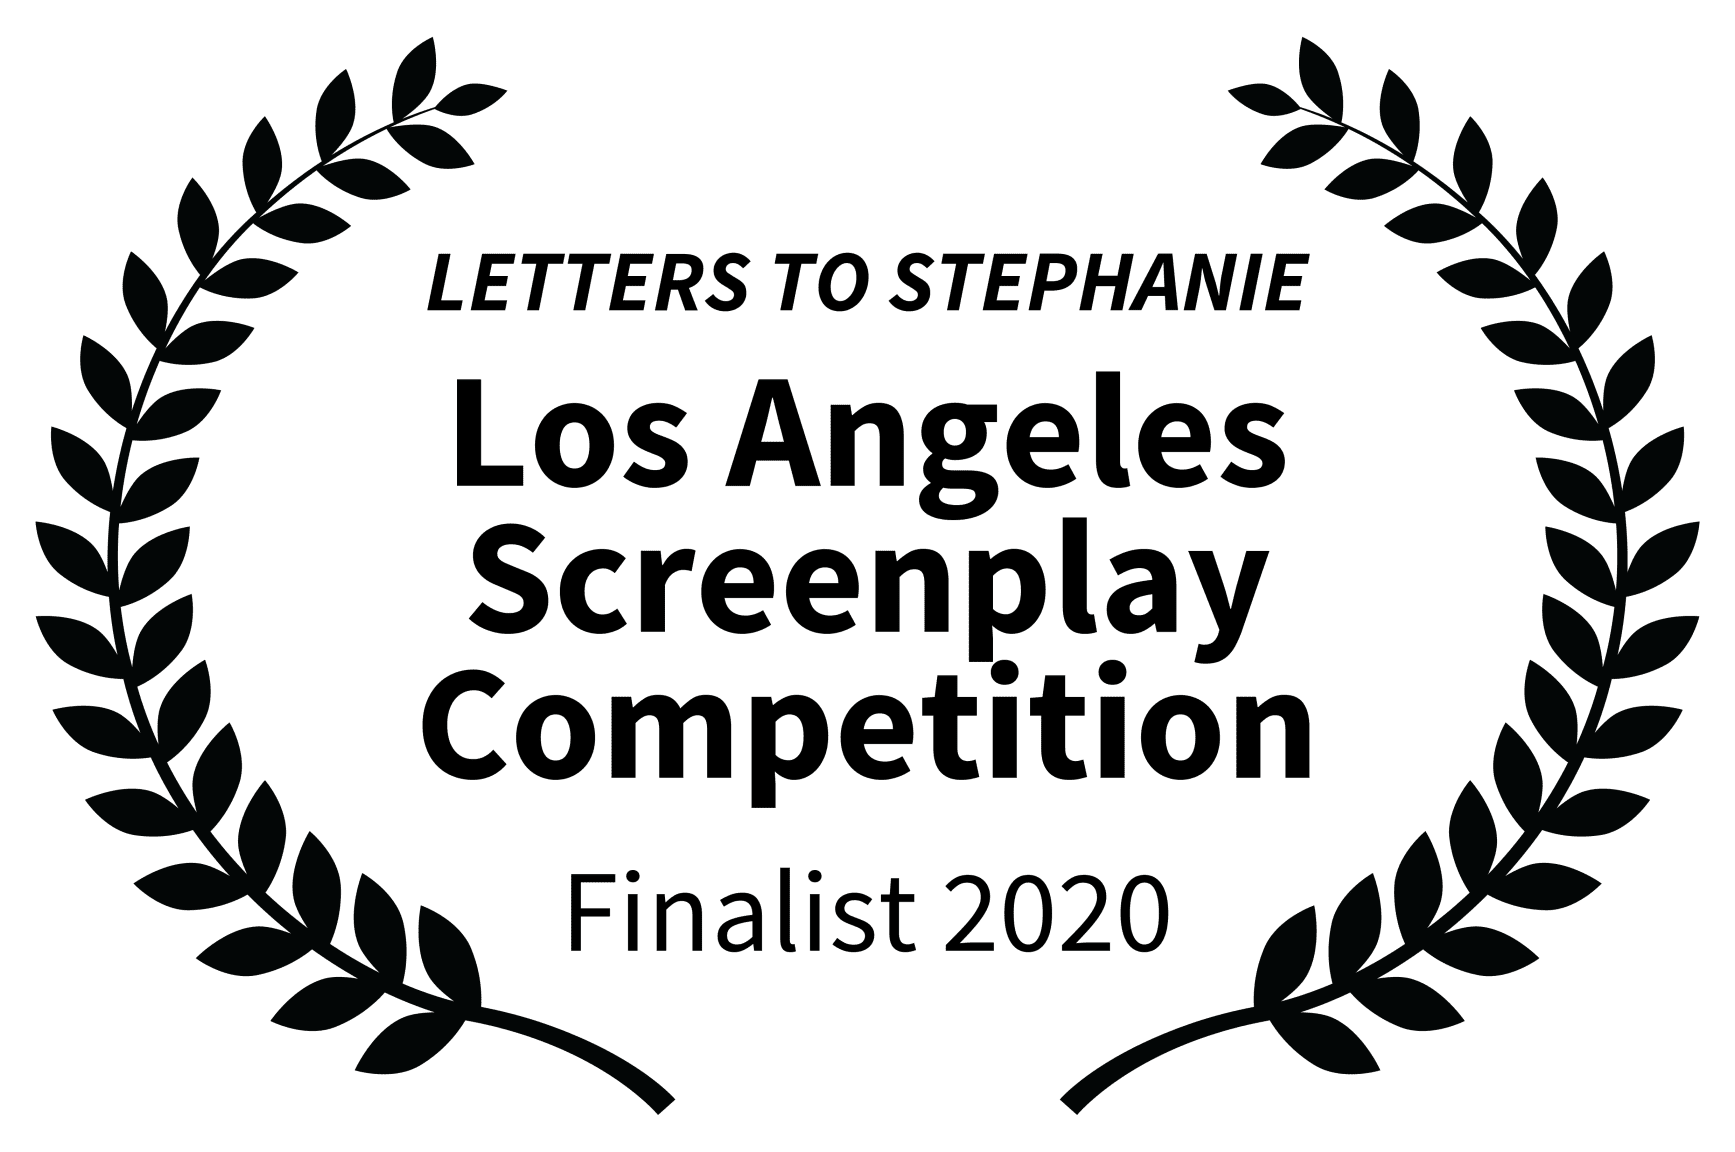 A green banner with leaves and the words " letters to stephanie los angeles screenplay competition finalist 2 0 2 0 ".